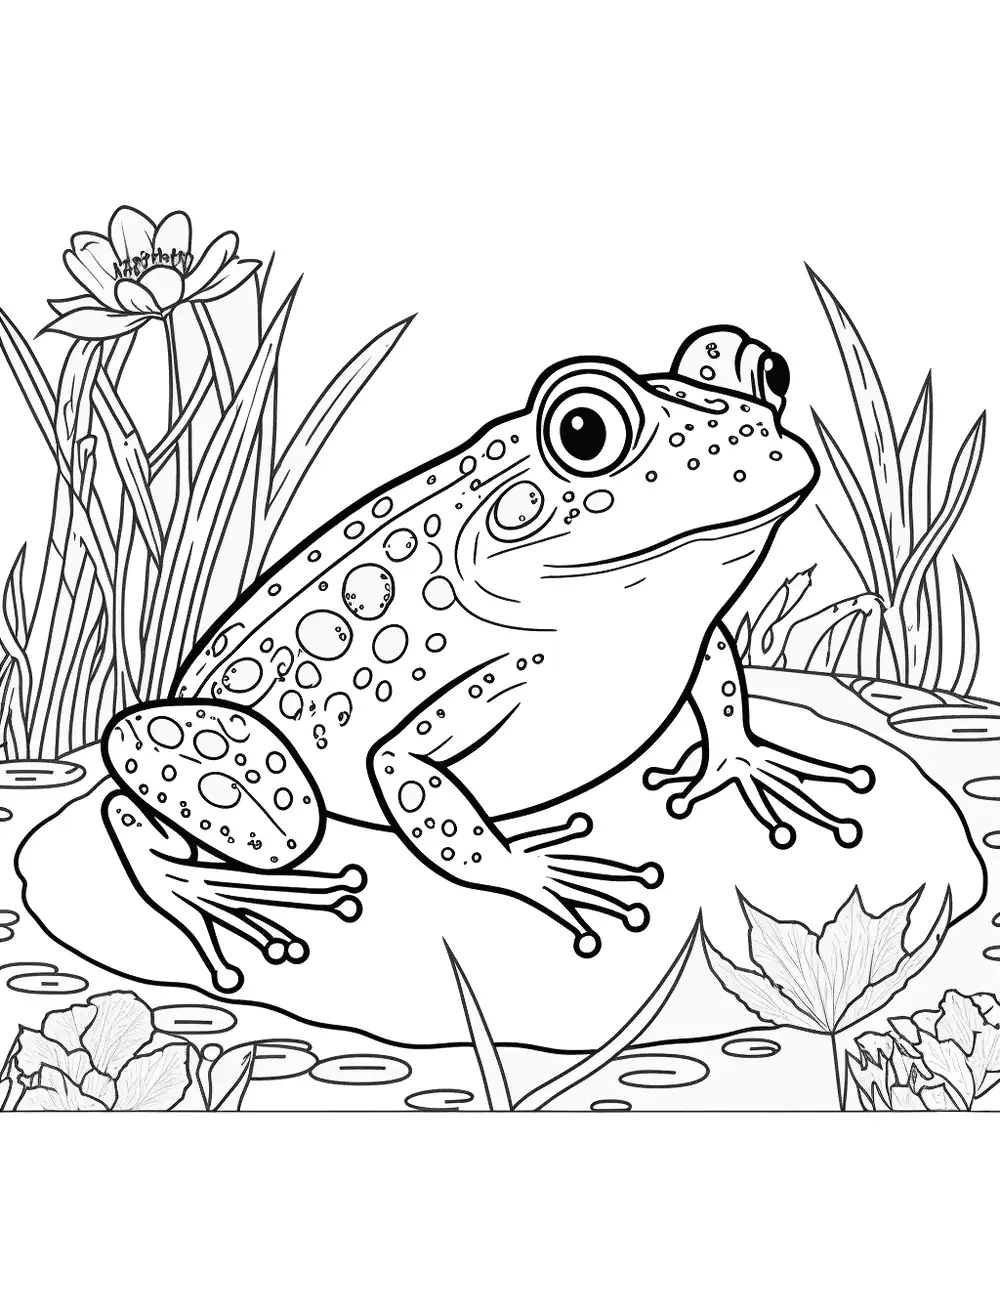 Bull Frog In A Swamp Coloring Page - A bull frog in a swamp, surrounded by lily pads and other plants